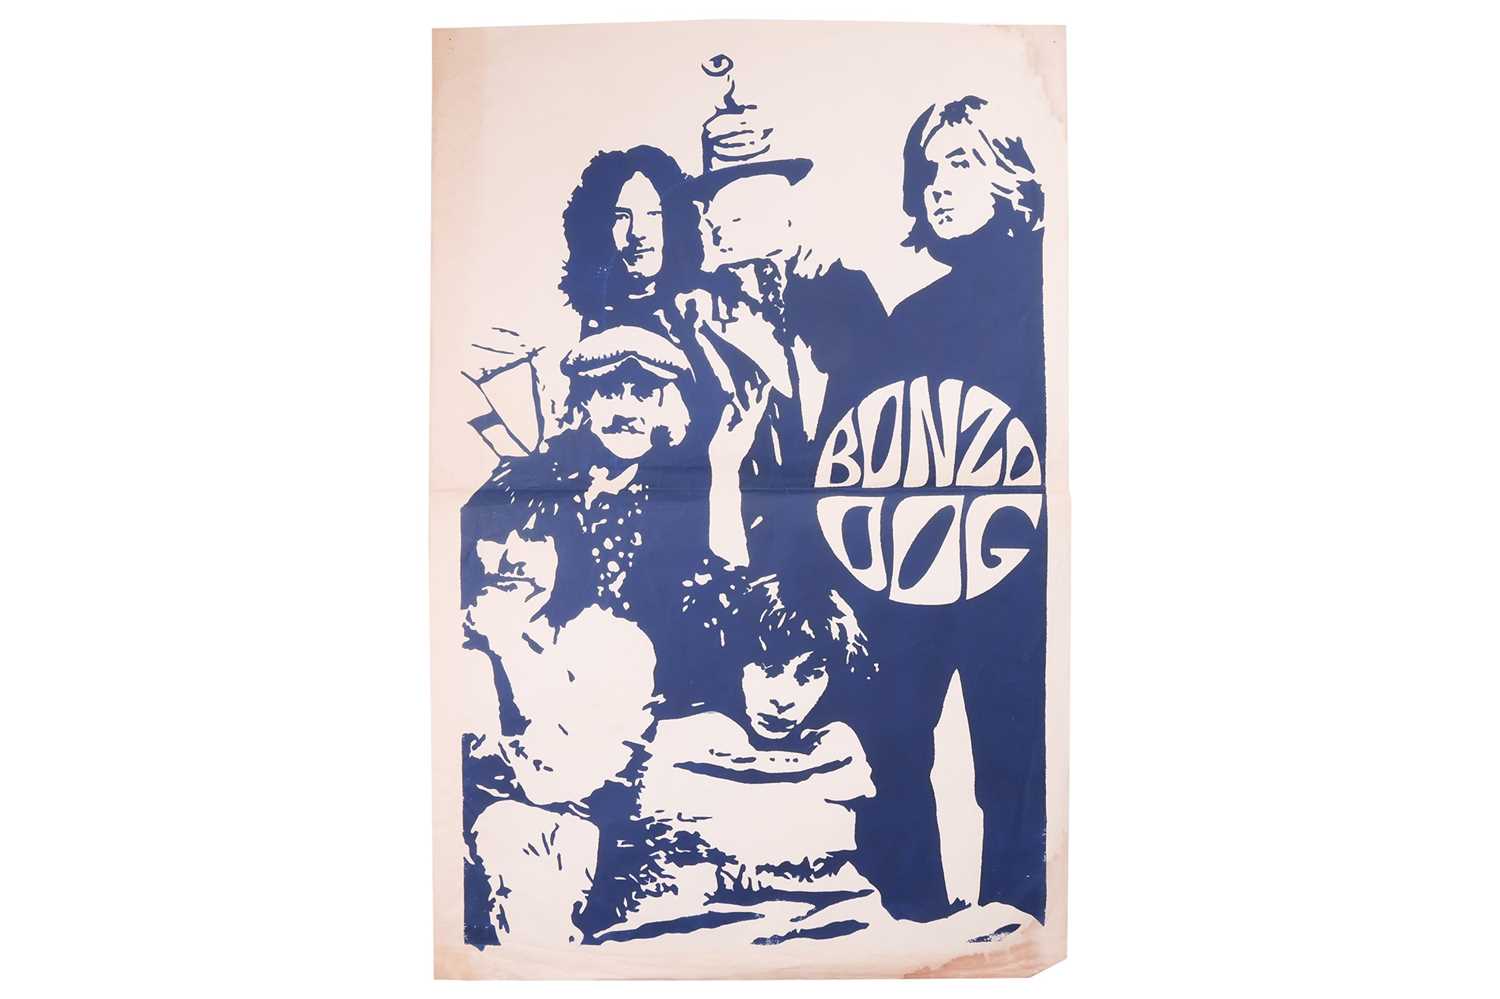 Three early promotional Bonzo Dog Doo-Dah Band posters, depicting the band in blue print on a white  - Image 3 of 4